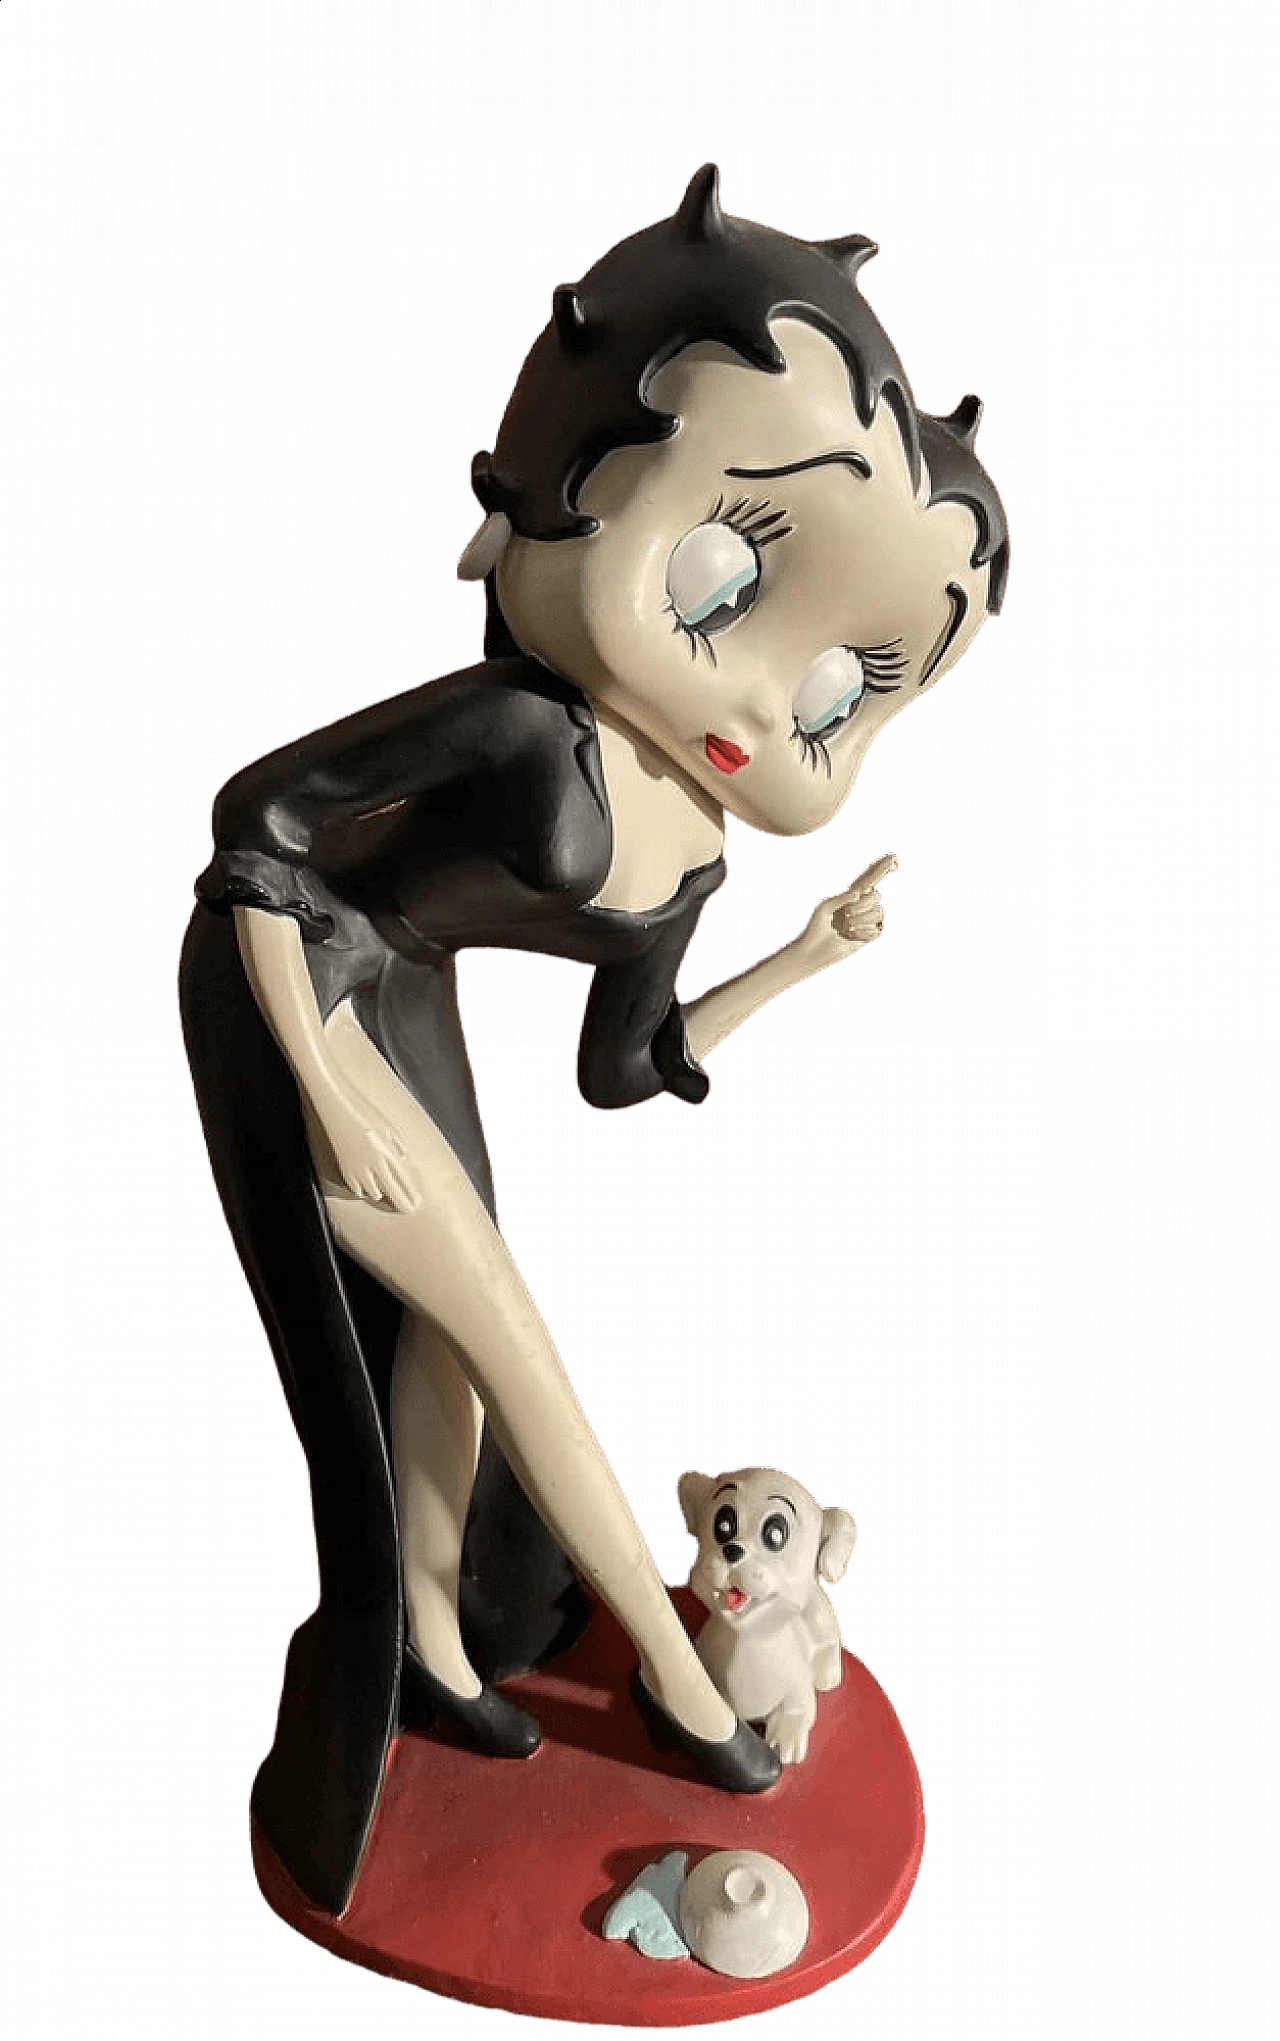 Betty Boop collectible figurine with black dress and small dog by Fleischer Studios, 2007 10